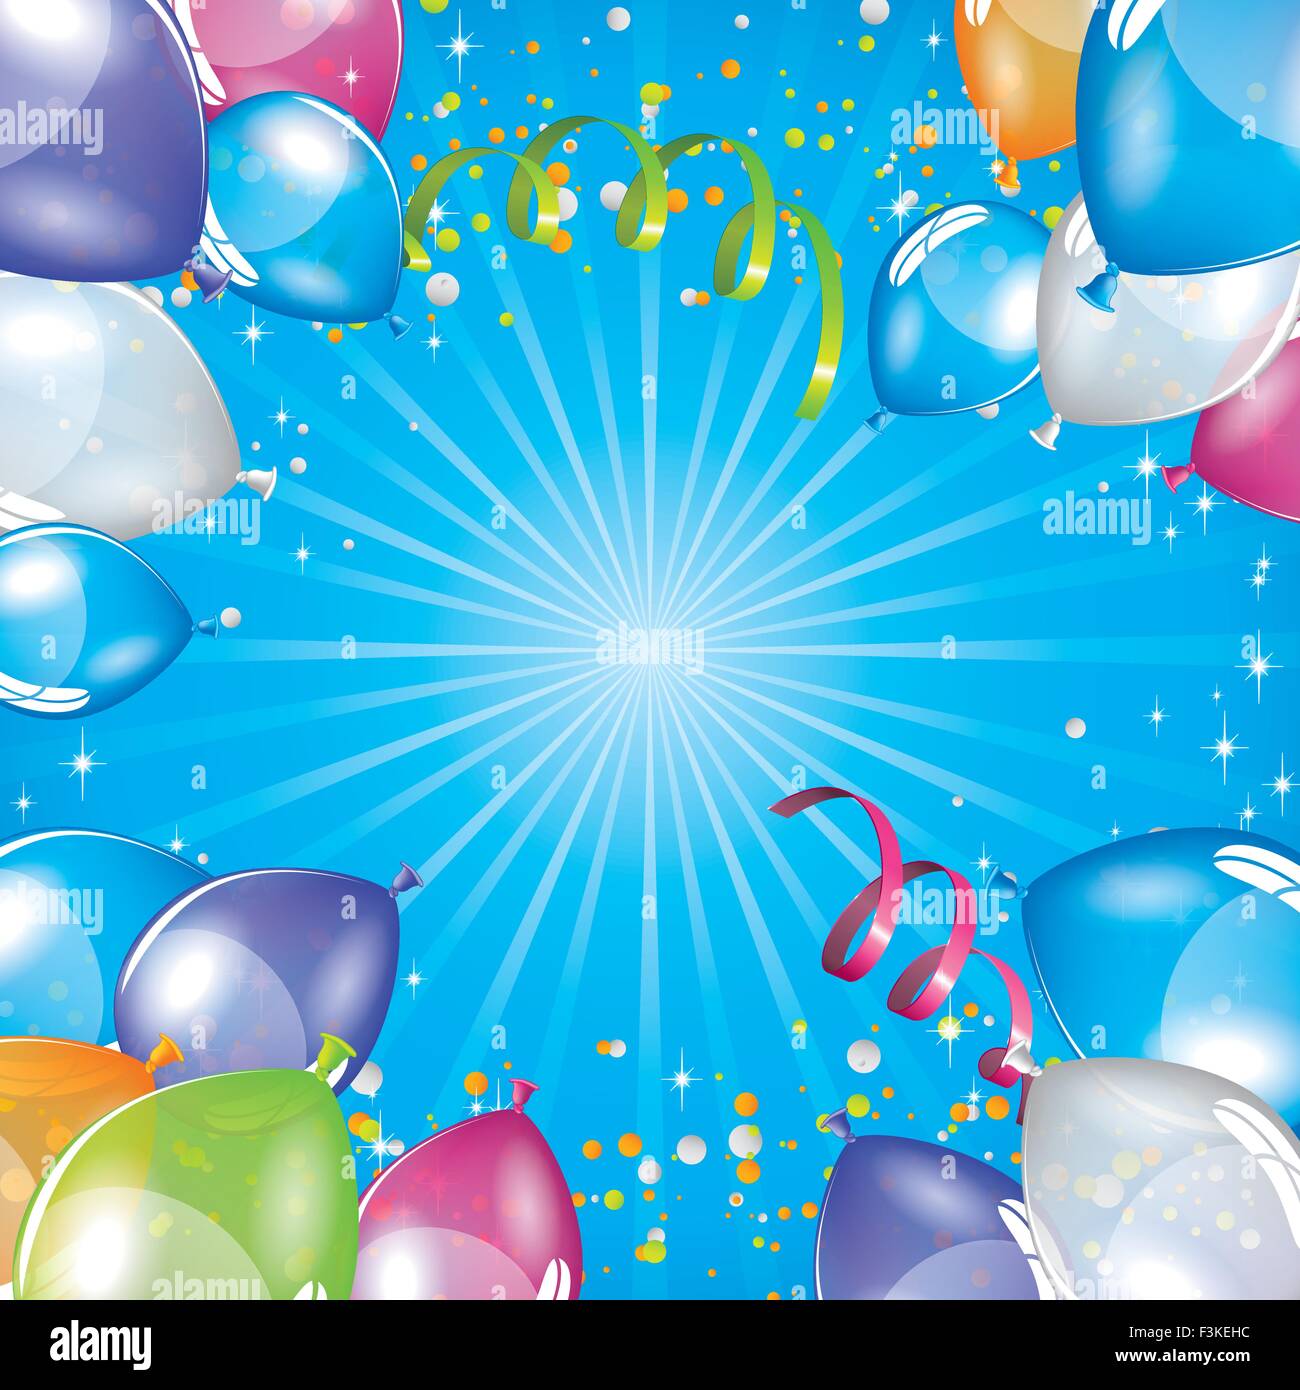 Blue balloons background Stock Vector